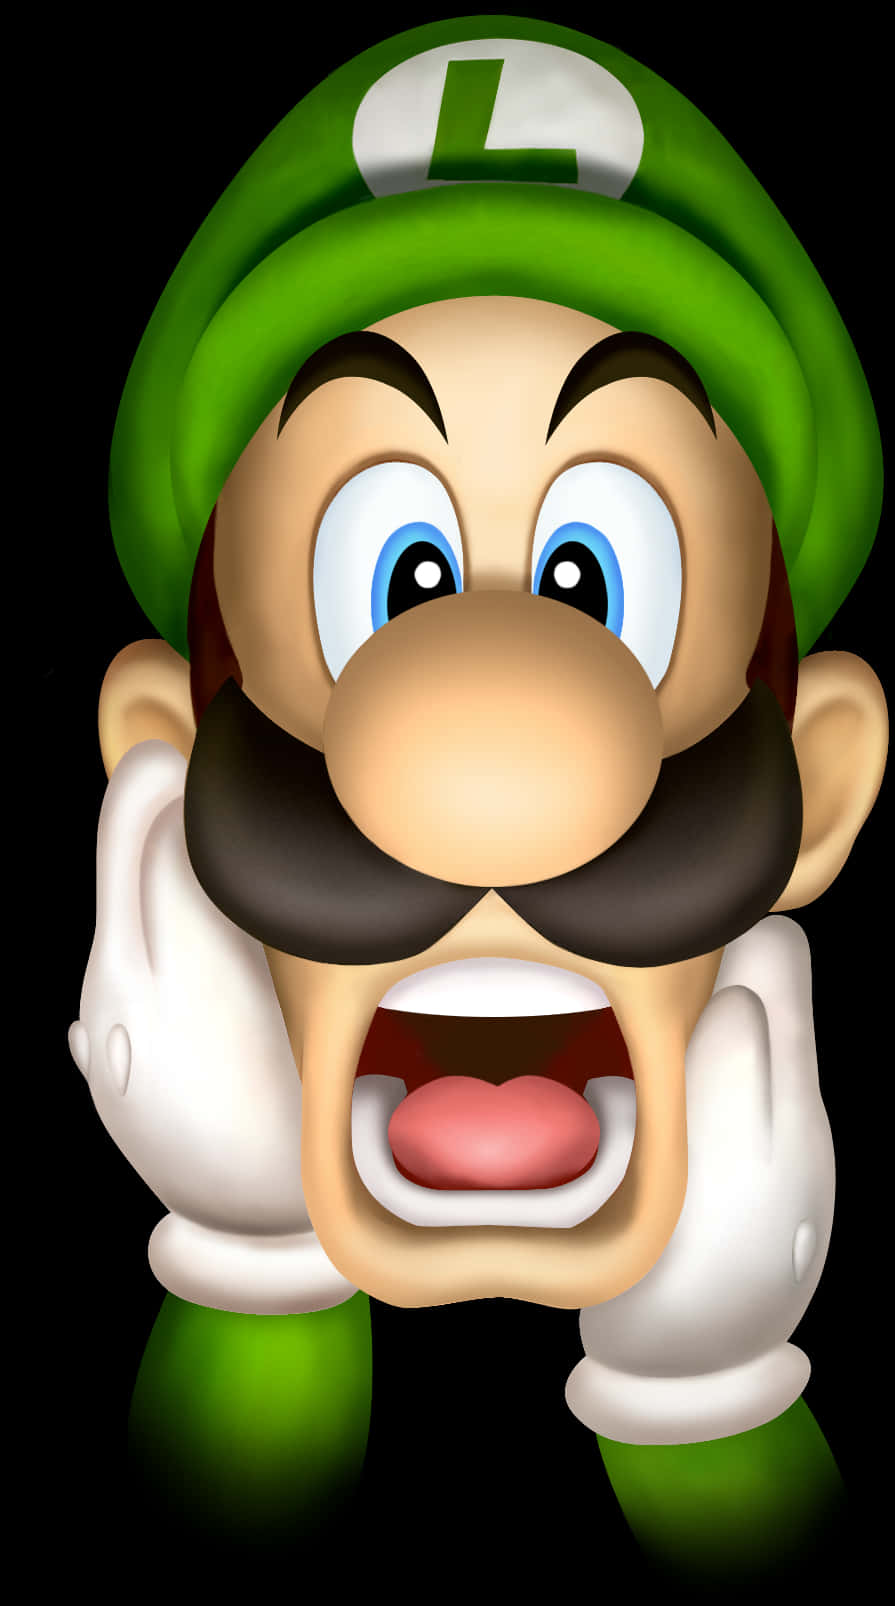 A Cartoon Of A Man With A Green Hat And Mustache